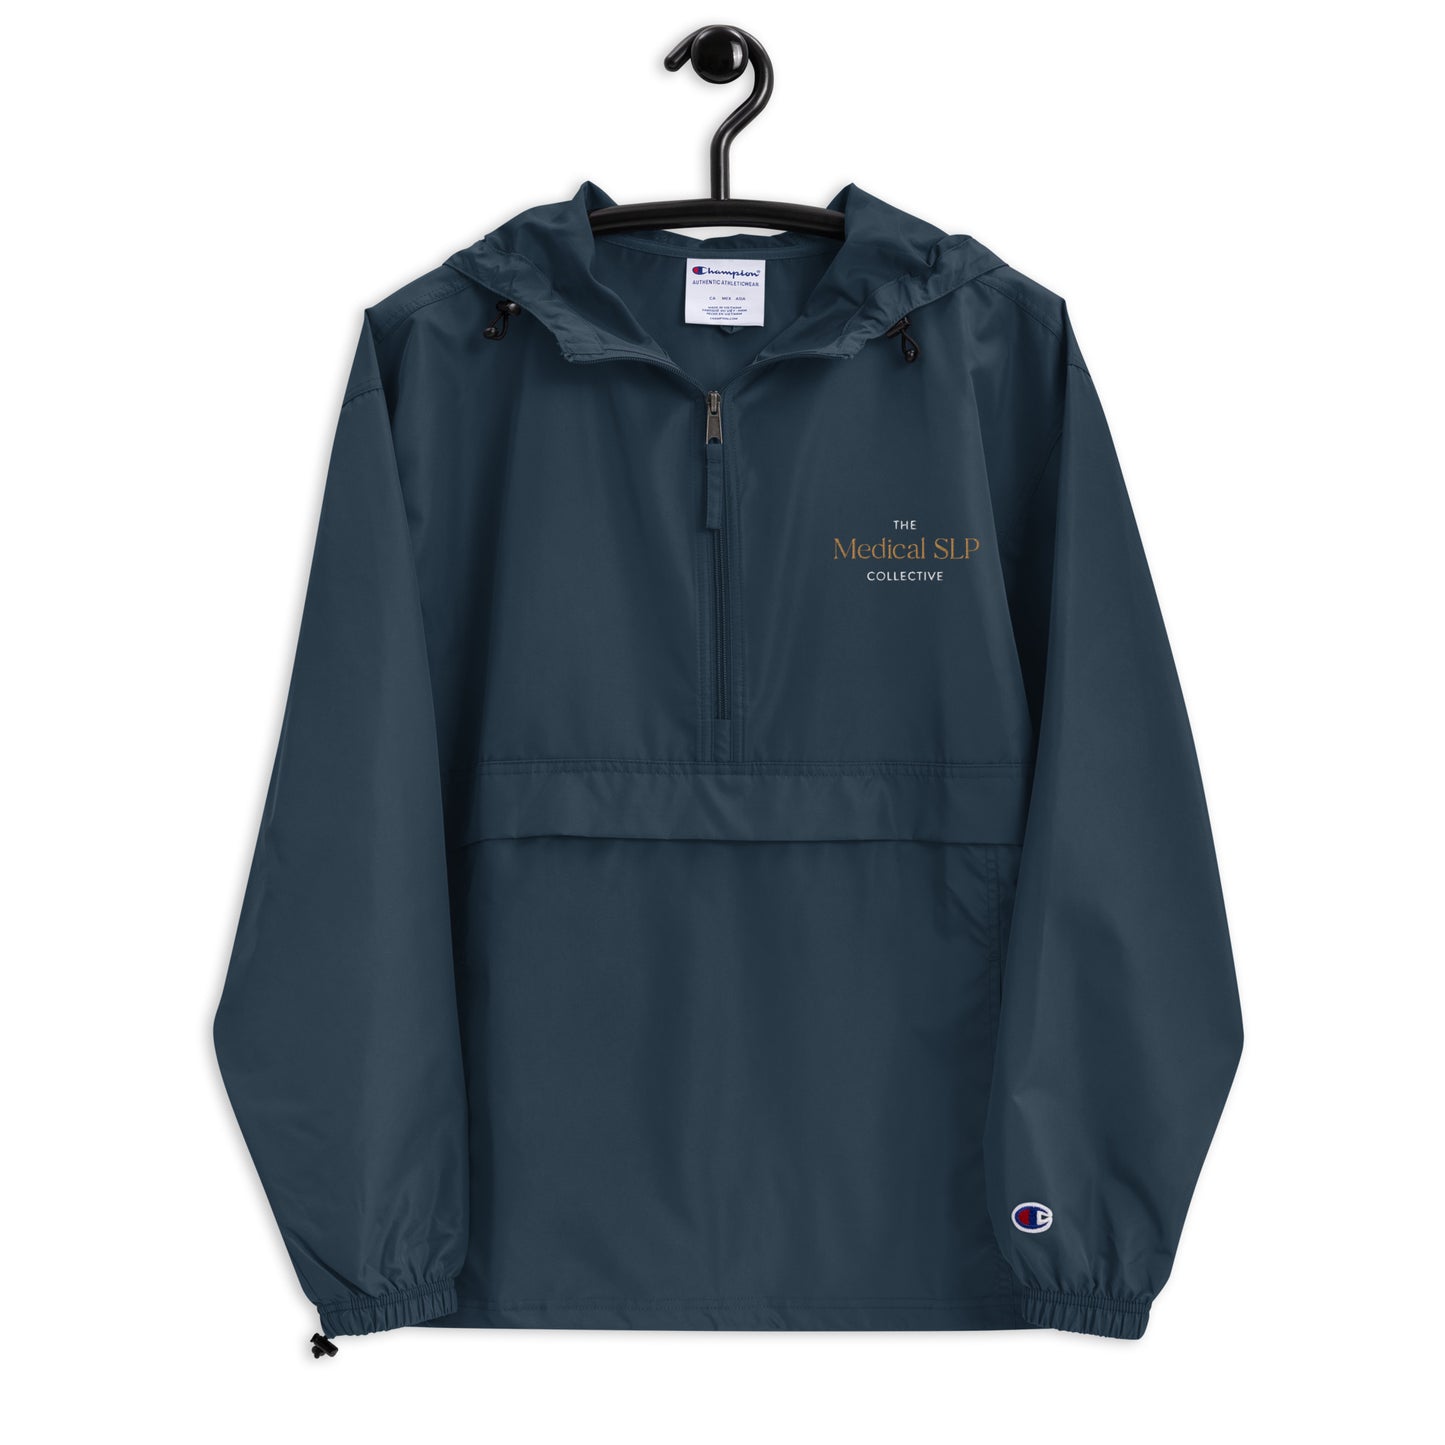 The Collective Embroidered Champion Jacket